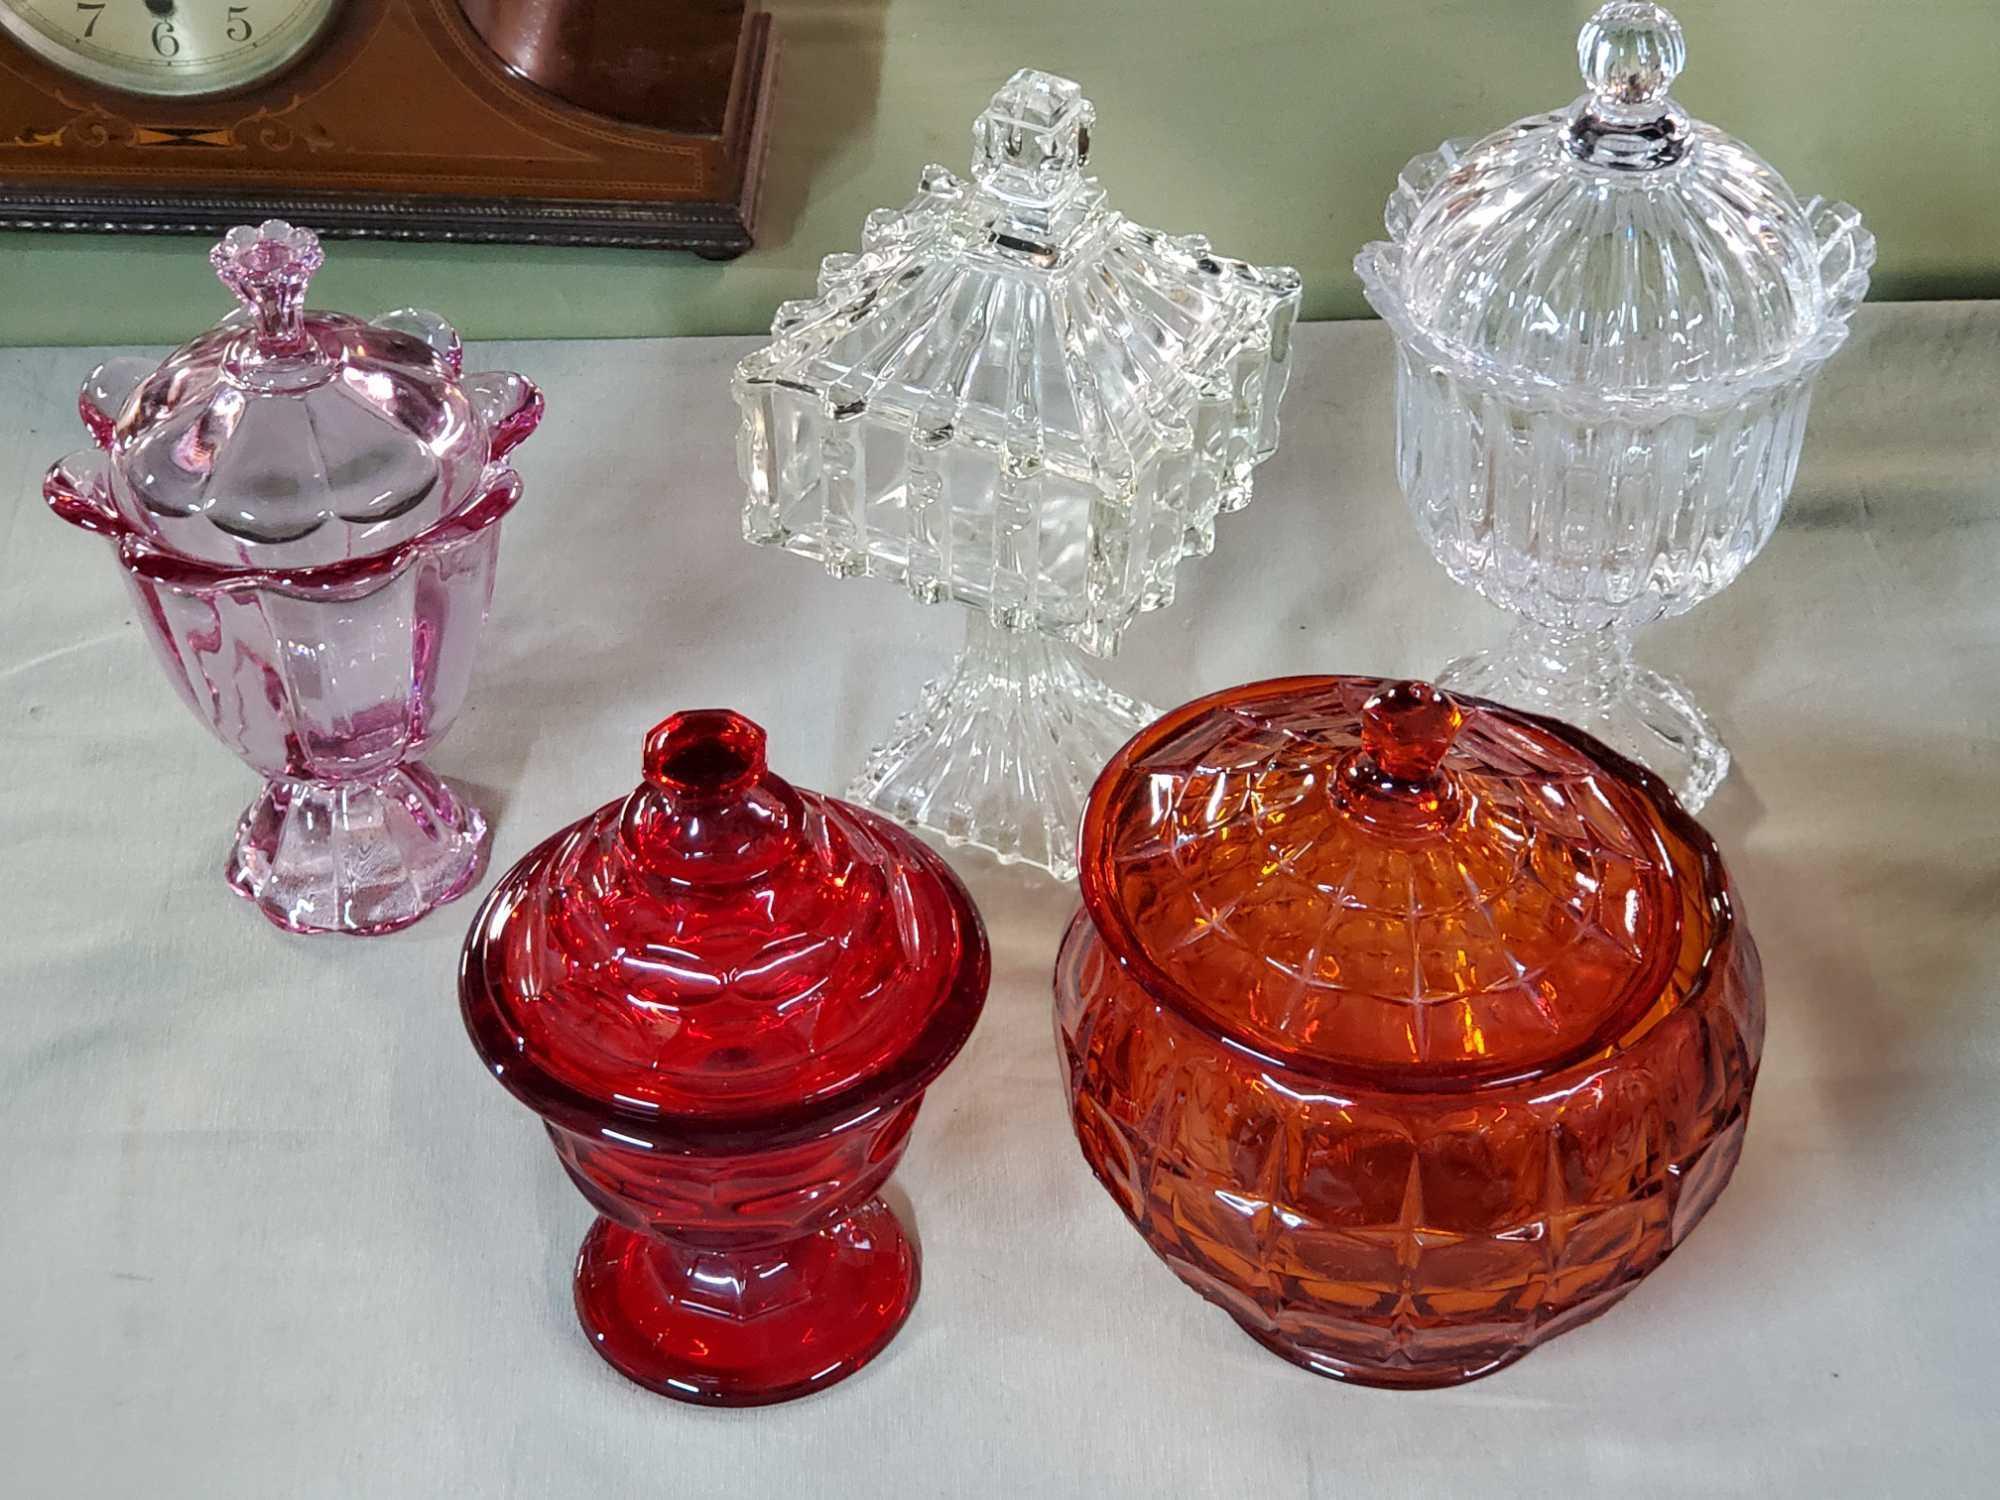 5 EAPG and colored Retro Vintage Art Glass Covered Bowls, Jars and Compotes